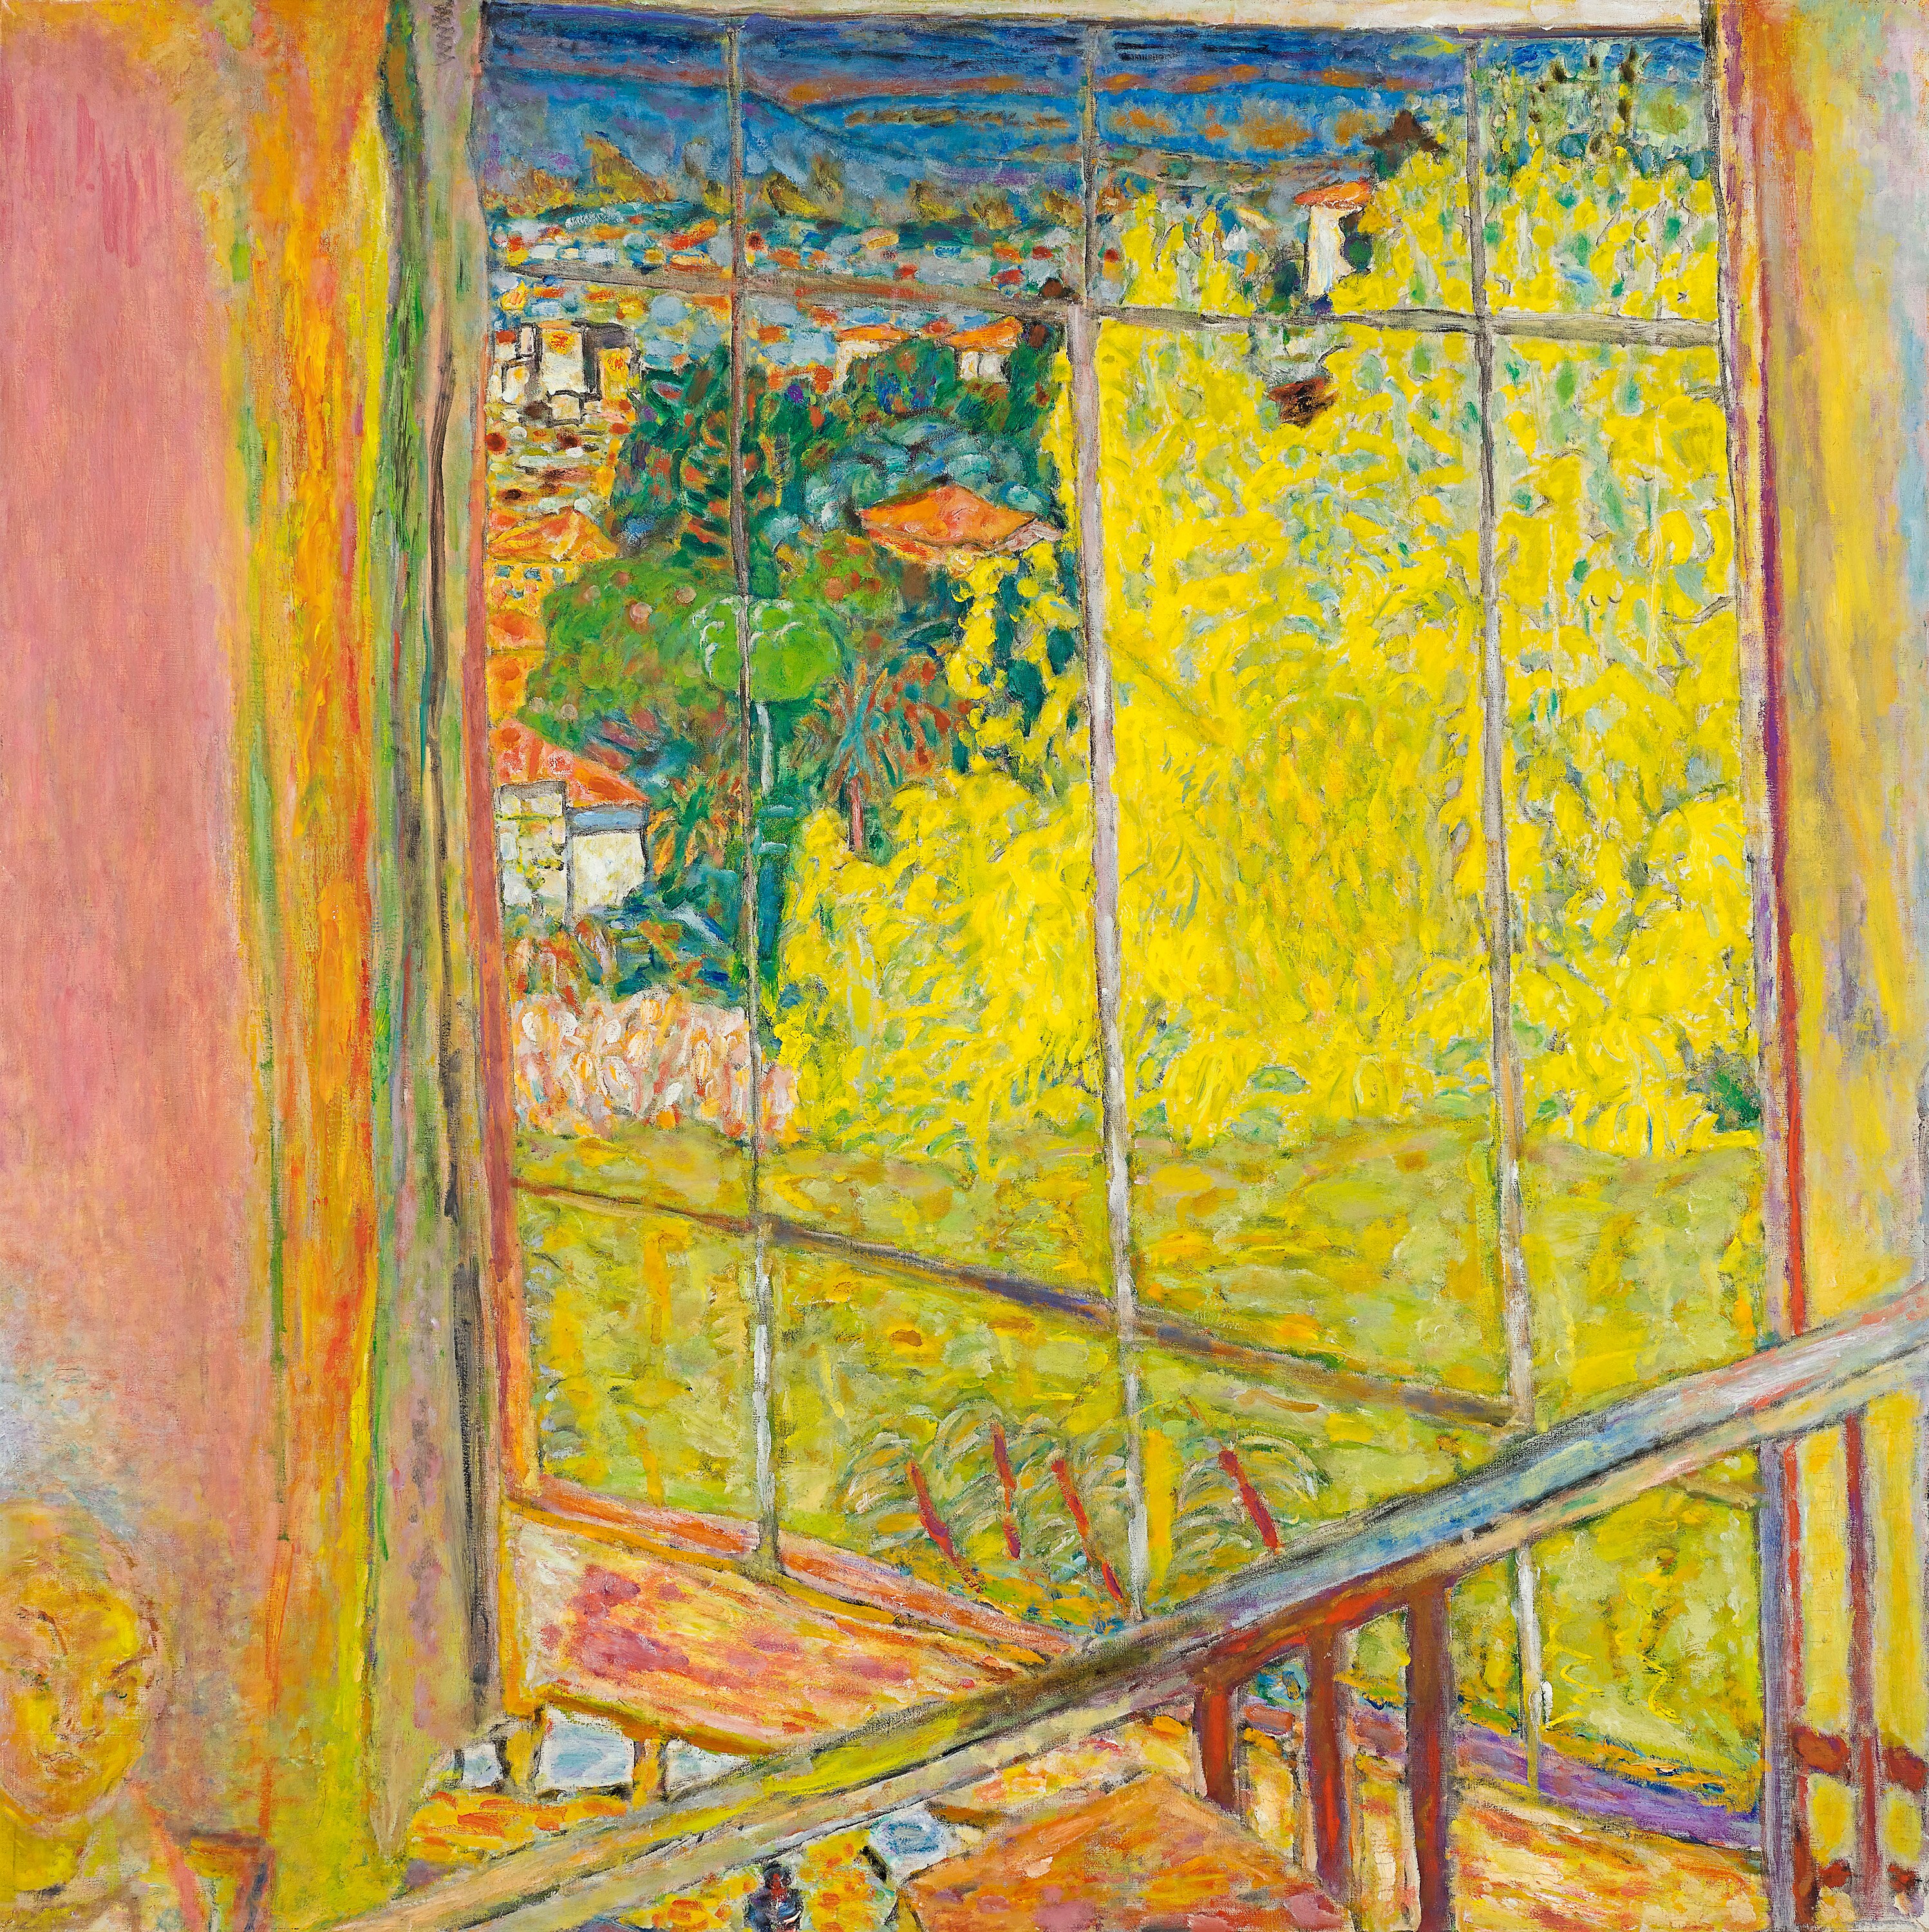 An oil painting showing bright yellow flowering trees through a window.